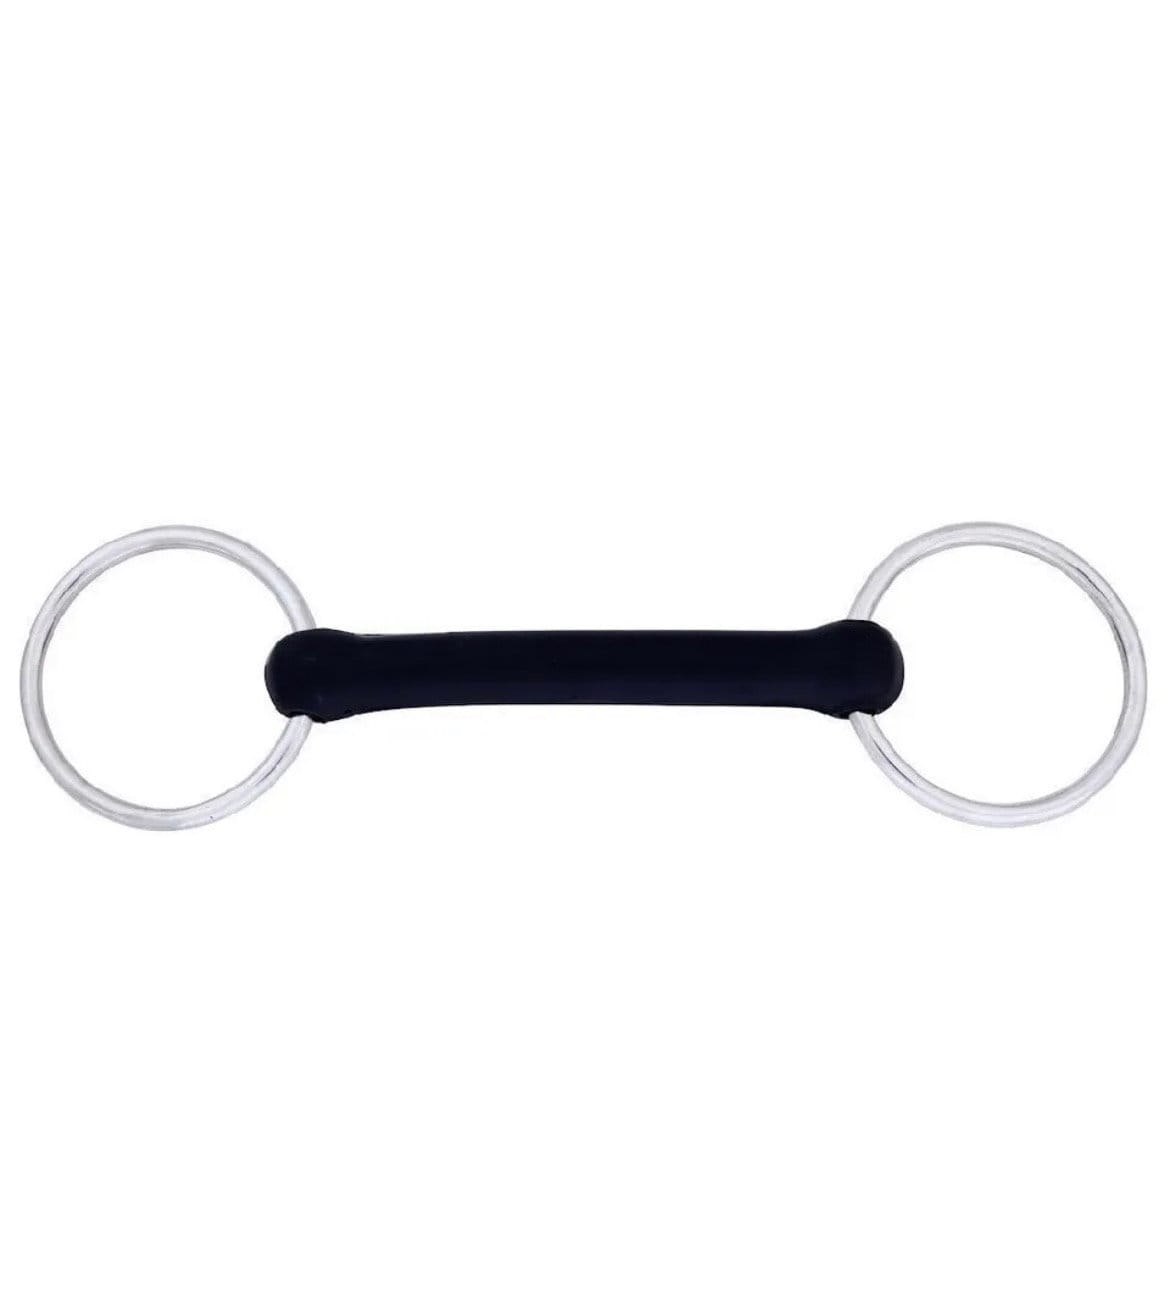 DS Hard Rubber Single-Jointed Snaffle D-Ring Bit | Dover Saddlery